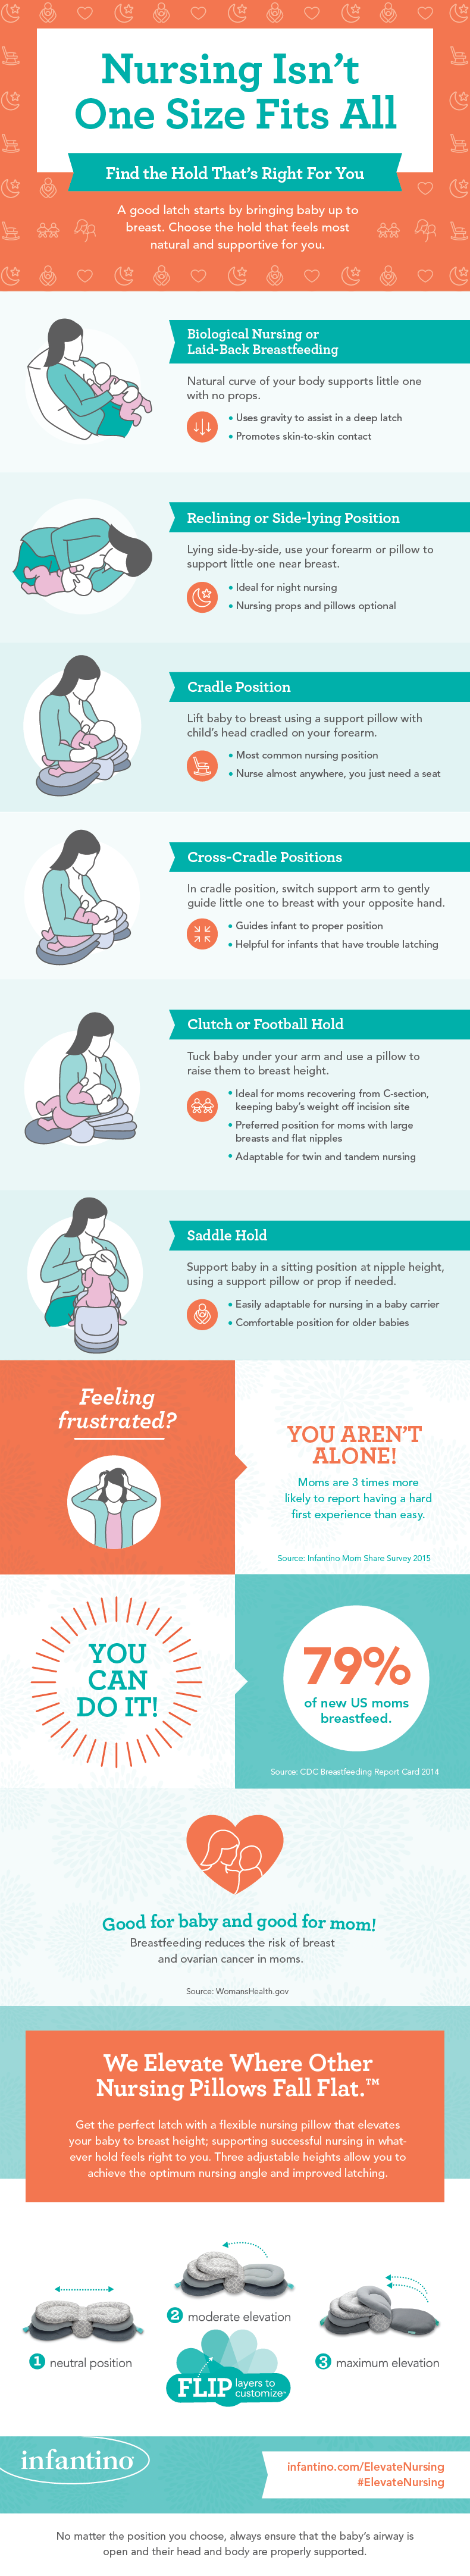 Nursing isn't one-size-fits-all infographic